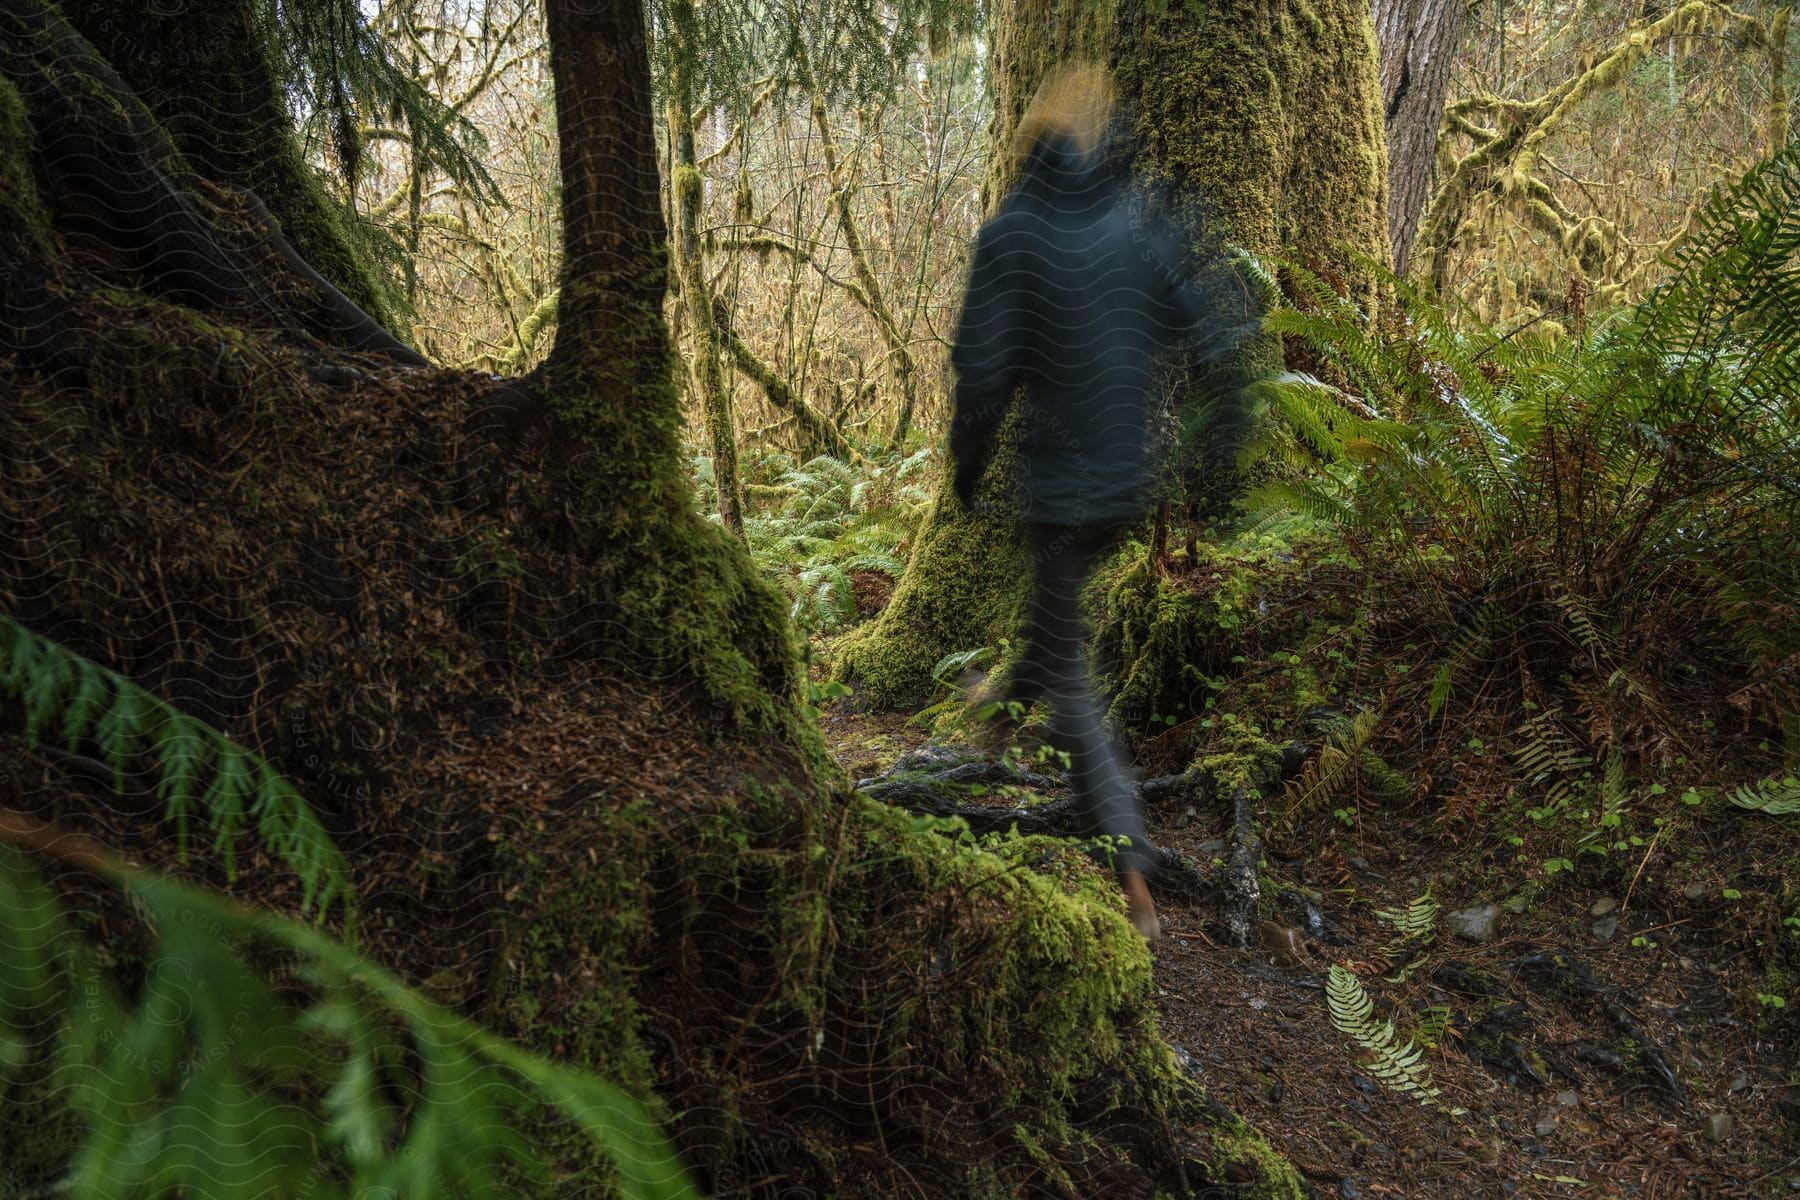 A man in grey jacket is hiking through the woods.